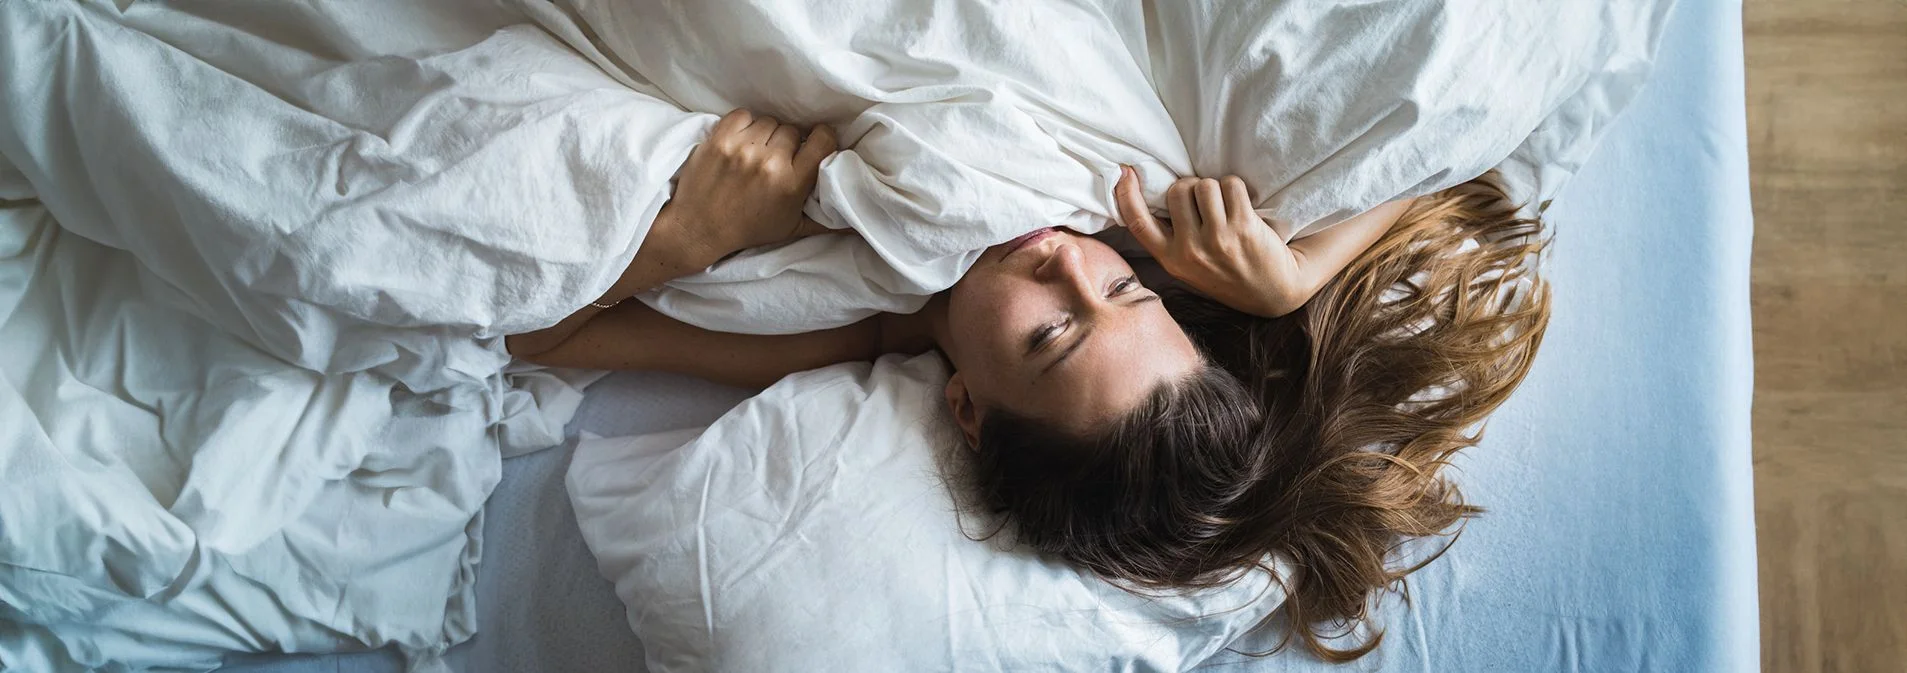 Woman in bed slowly waking up